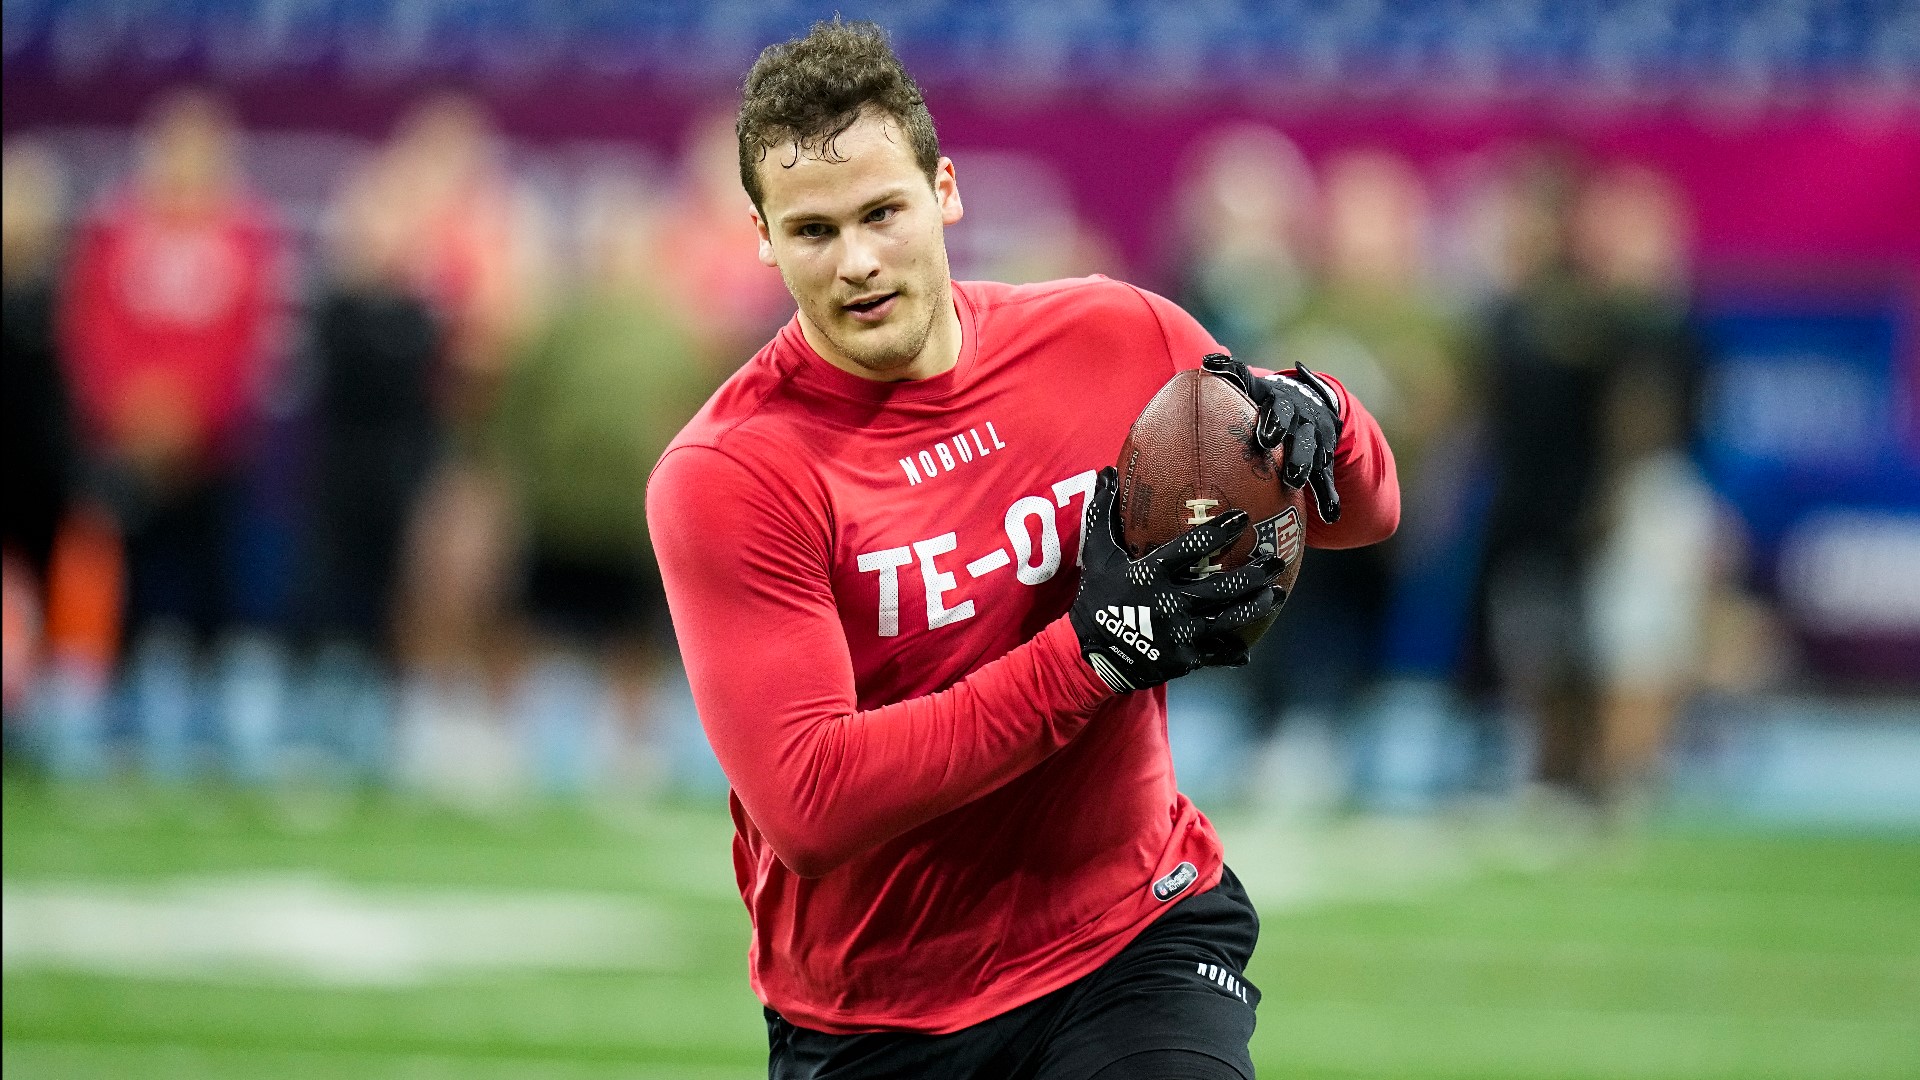 Detroit acquired the early second-round pick from Arizona on Thursday as part of a trade that gave the Cardinals the No. 6 pick overall.